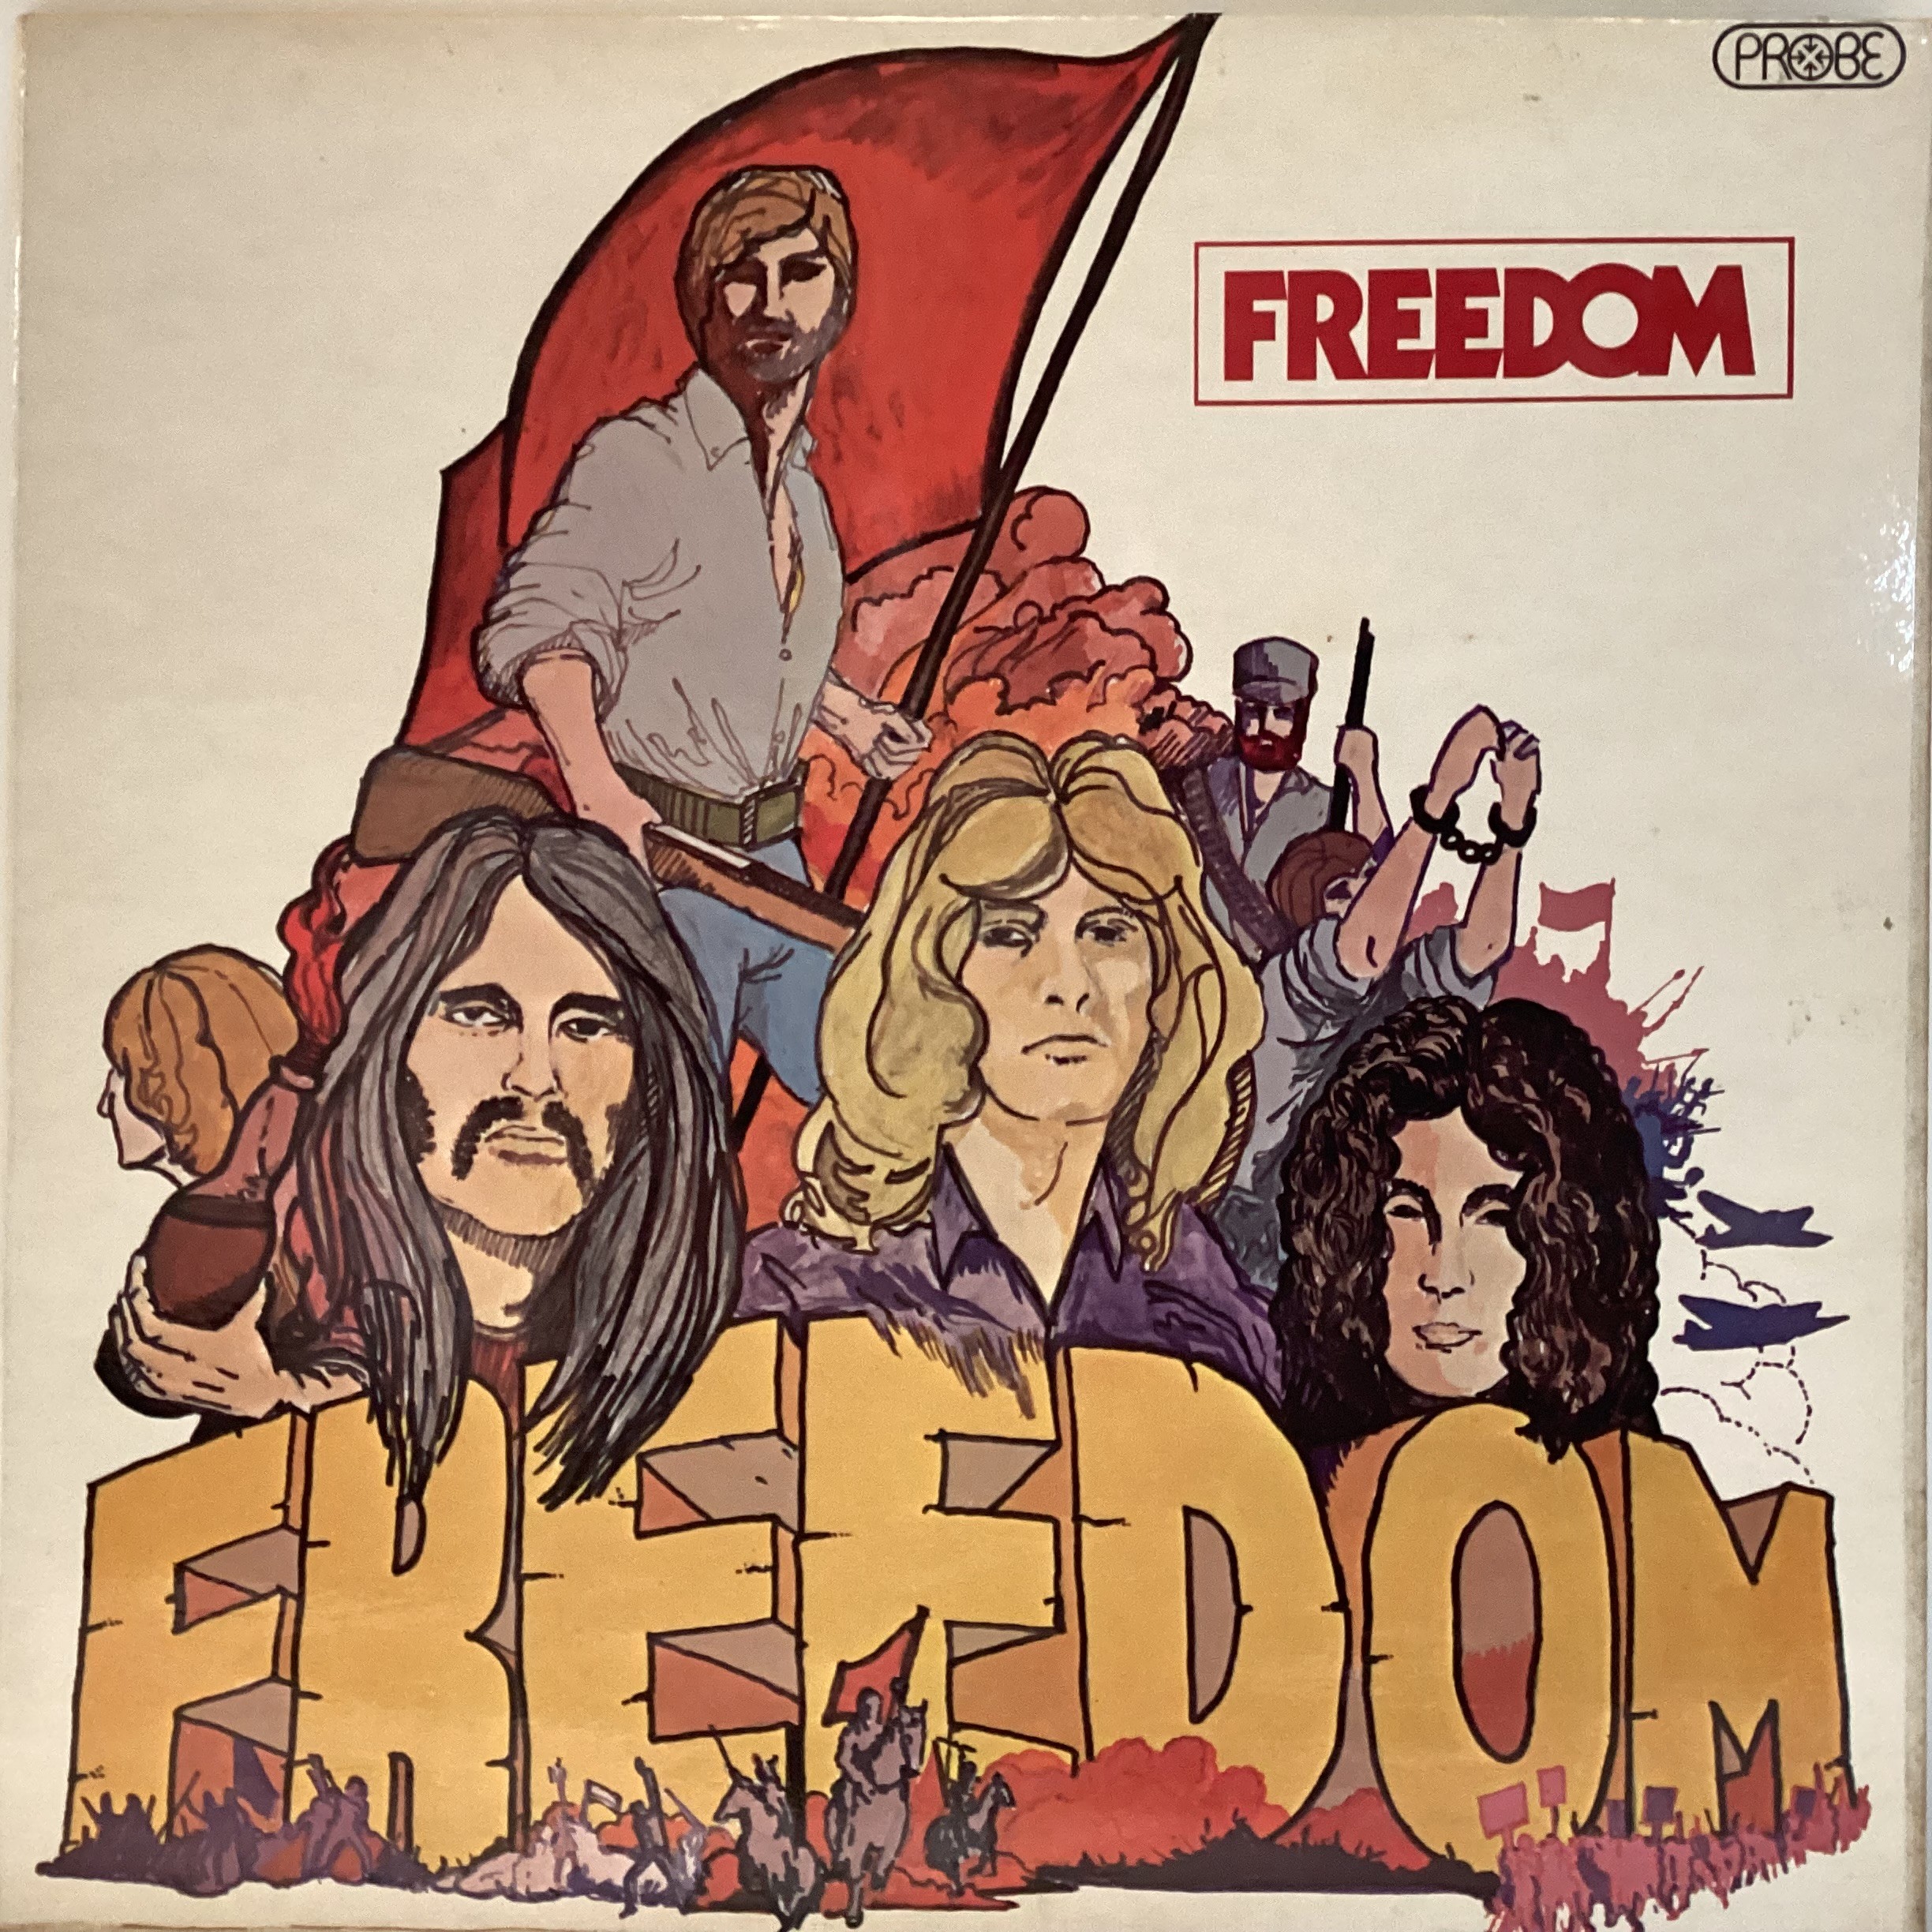 FREEDOM SELF TITLED LP ORIGINAL VINYL. This is a rare copy of Freedom's Self Titled album, their 3rd